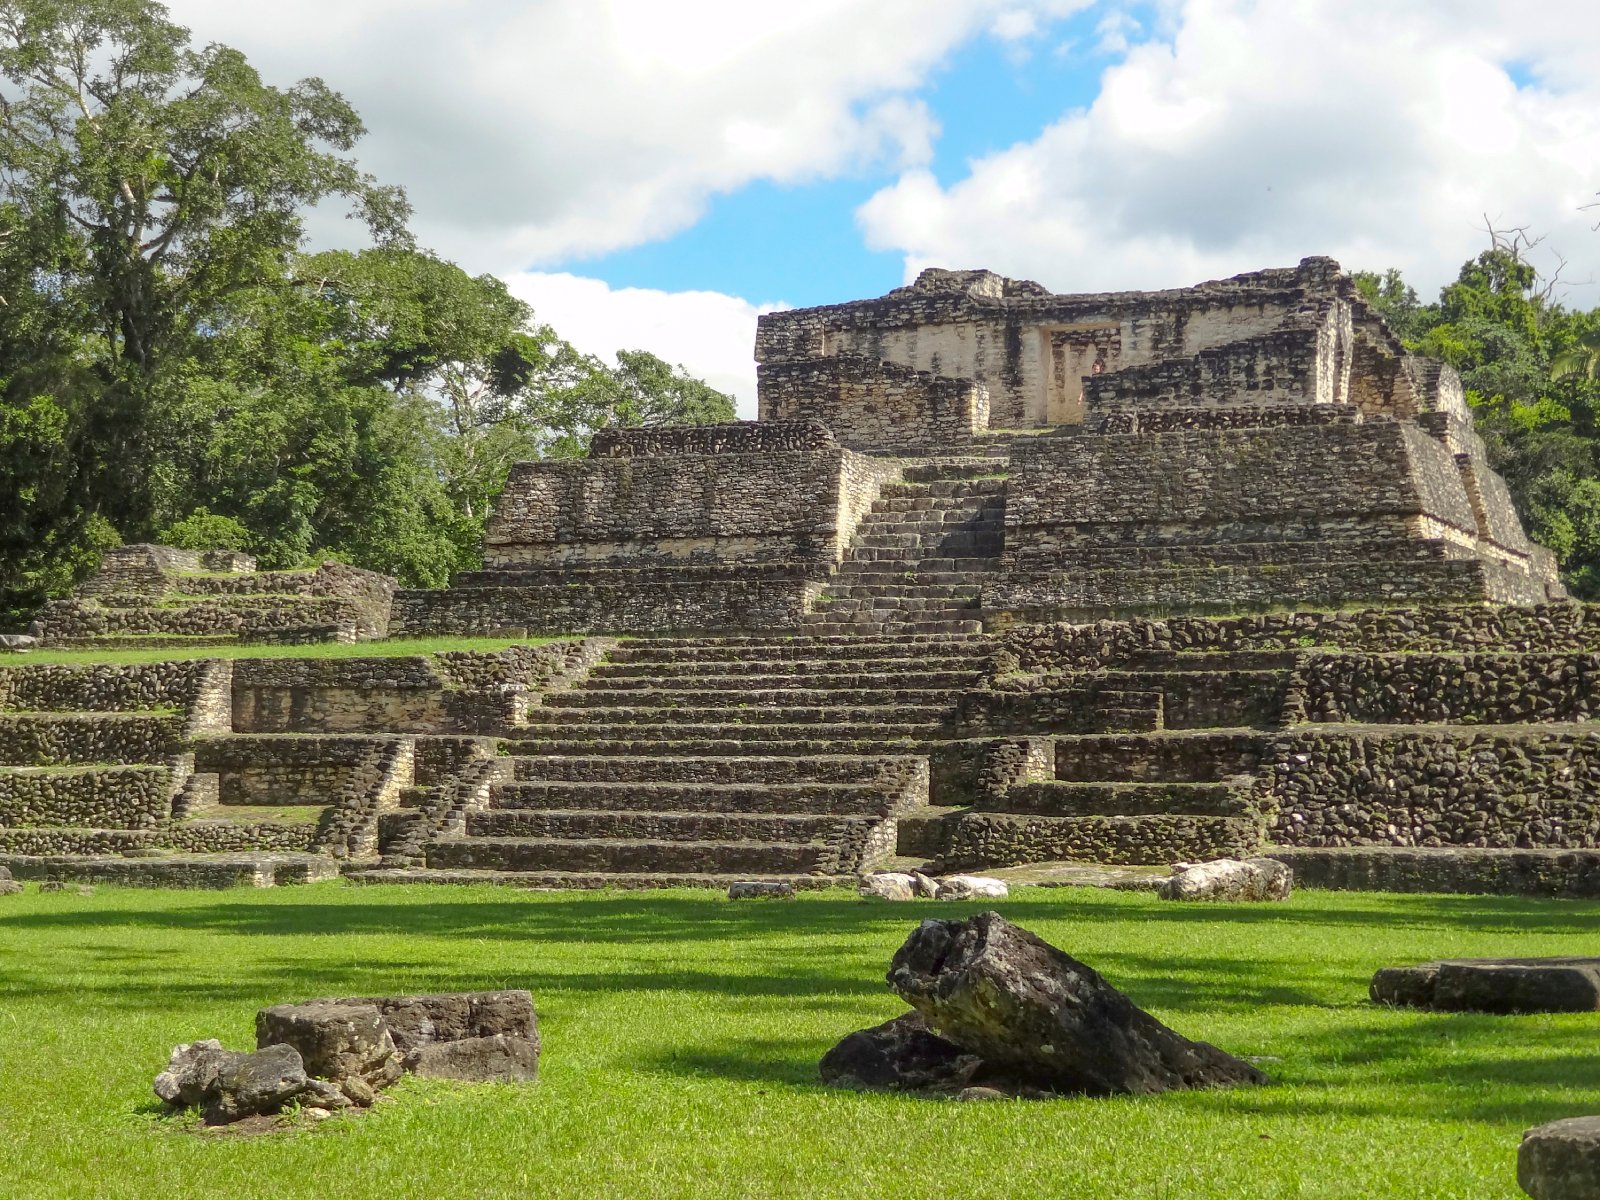 <p class="wp-caption-text">Image Credit: Shutterstock / PRILL</p>  <p><span>Caracol is Belize’s largest Maya archaeological site, nestled within the Chiquibul Forest Reserve. Once a major political center, Caracol’s extensive complex includes towering pyramids, royal tombs, and ancient astronomical observatories. The site’s most iconic structure, Caana (“Sky Palace”), remains the tallest man-made structure in Belize, offering breathtaking views of the surrounding jungle. Exploring Caracol provides a glimpse into the Maya civilization’s sophistication and highlights the deep connection between the ancient people and their environment.</span></p>